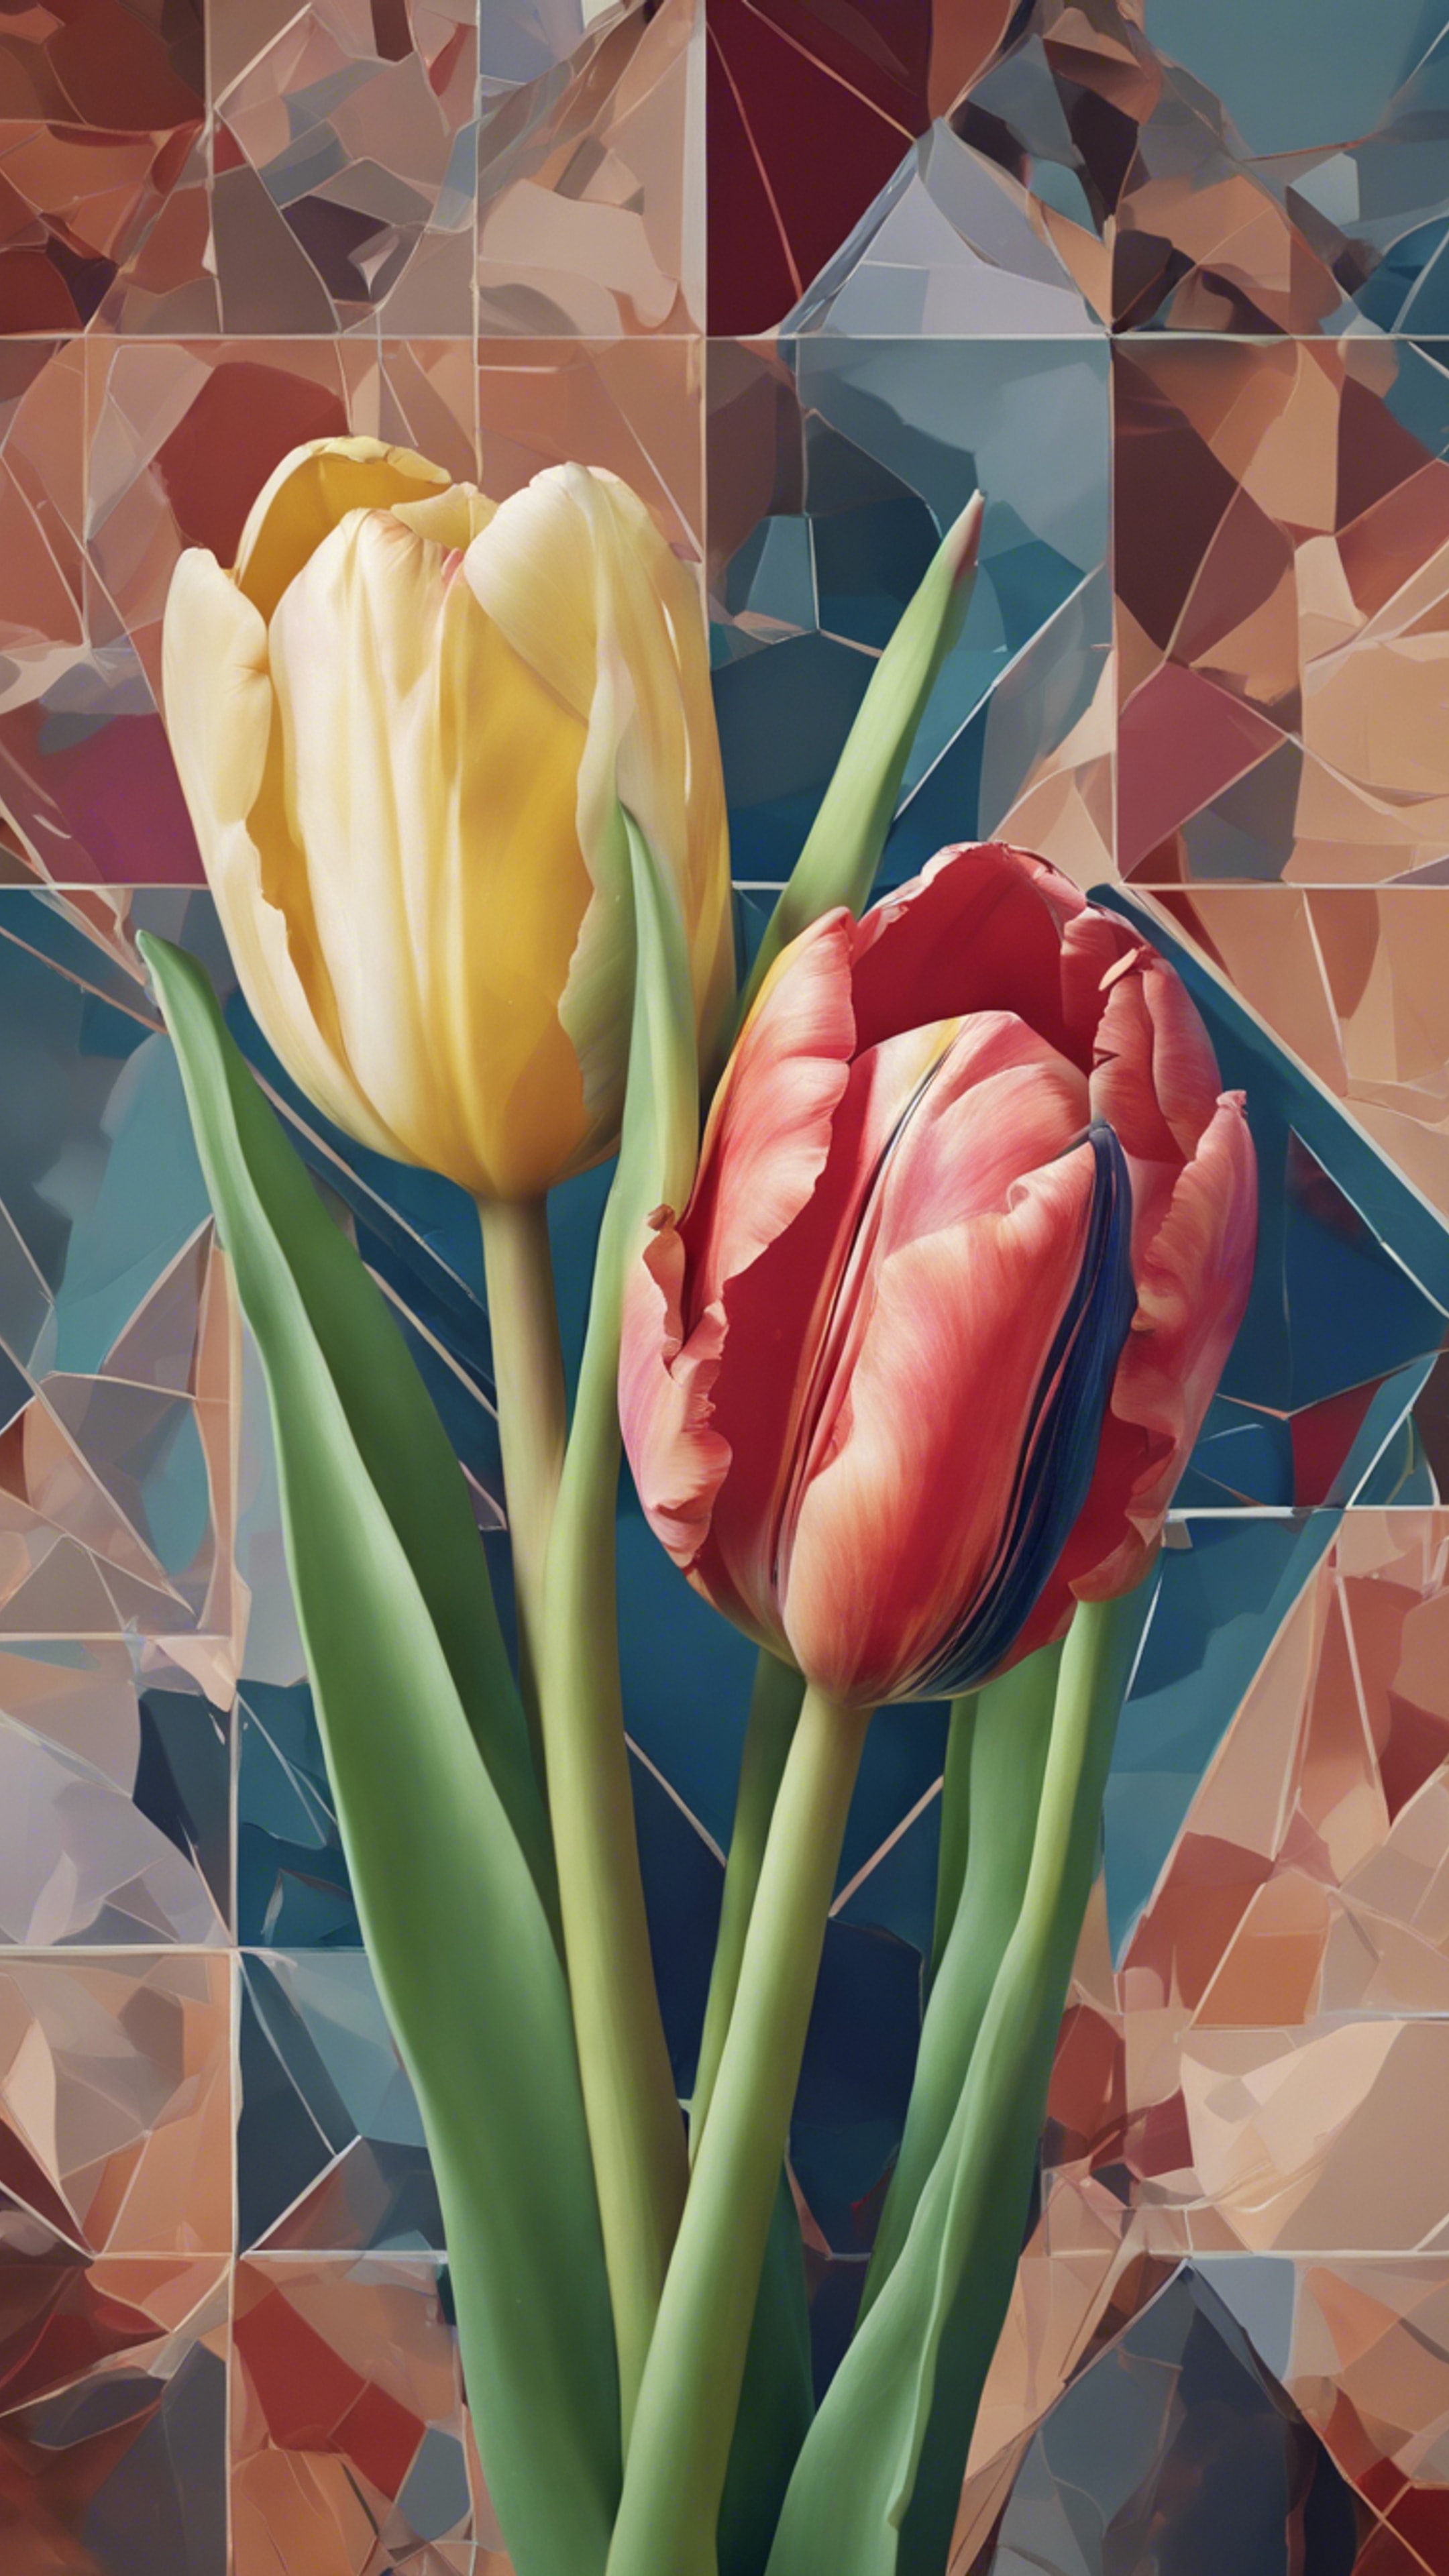 A tulip rendered in a cubism style, breaking the flower into geometric shapes and forms.壁紙[81941ff365fa4843b804]